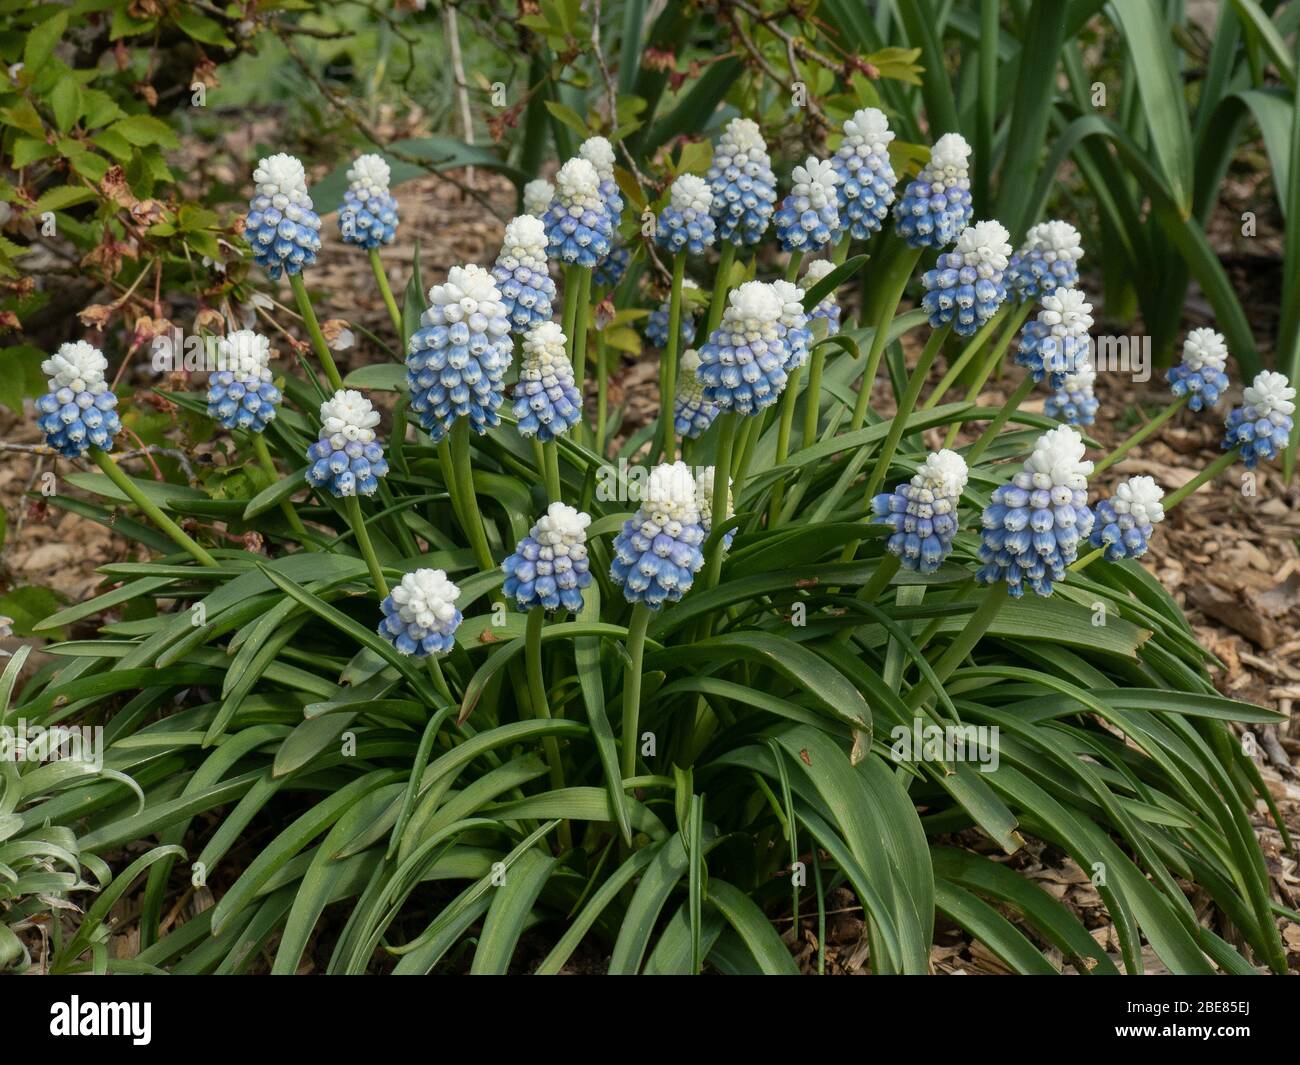 A clump of the grape hyacinth Muscari Mountain Lady in full flower Stock Photo